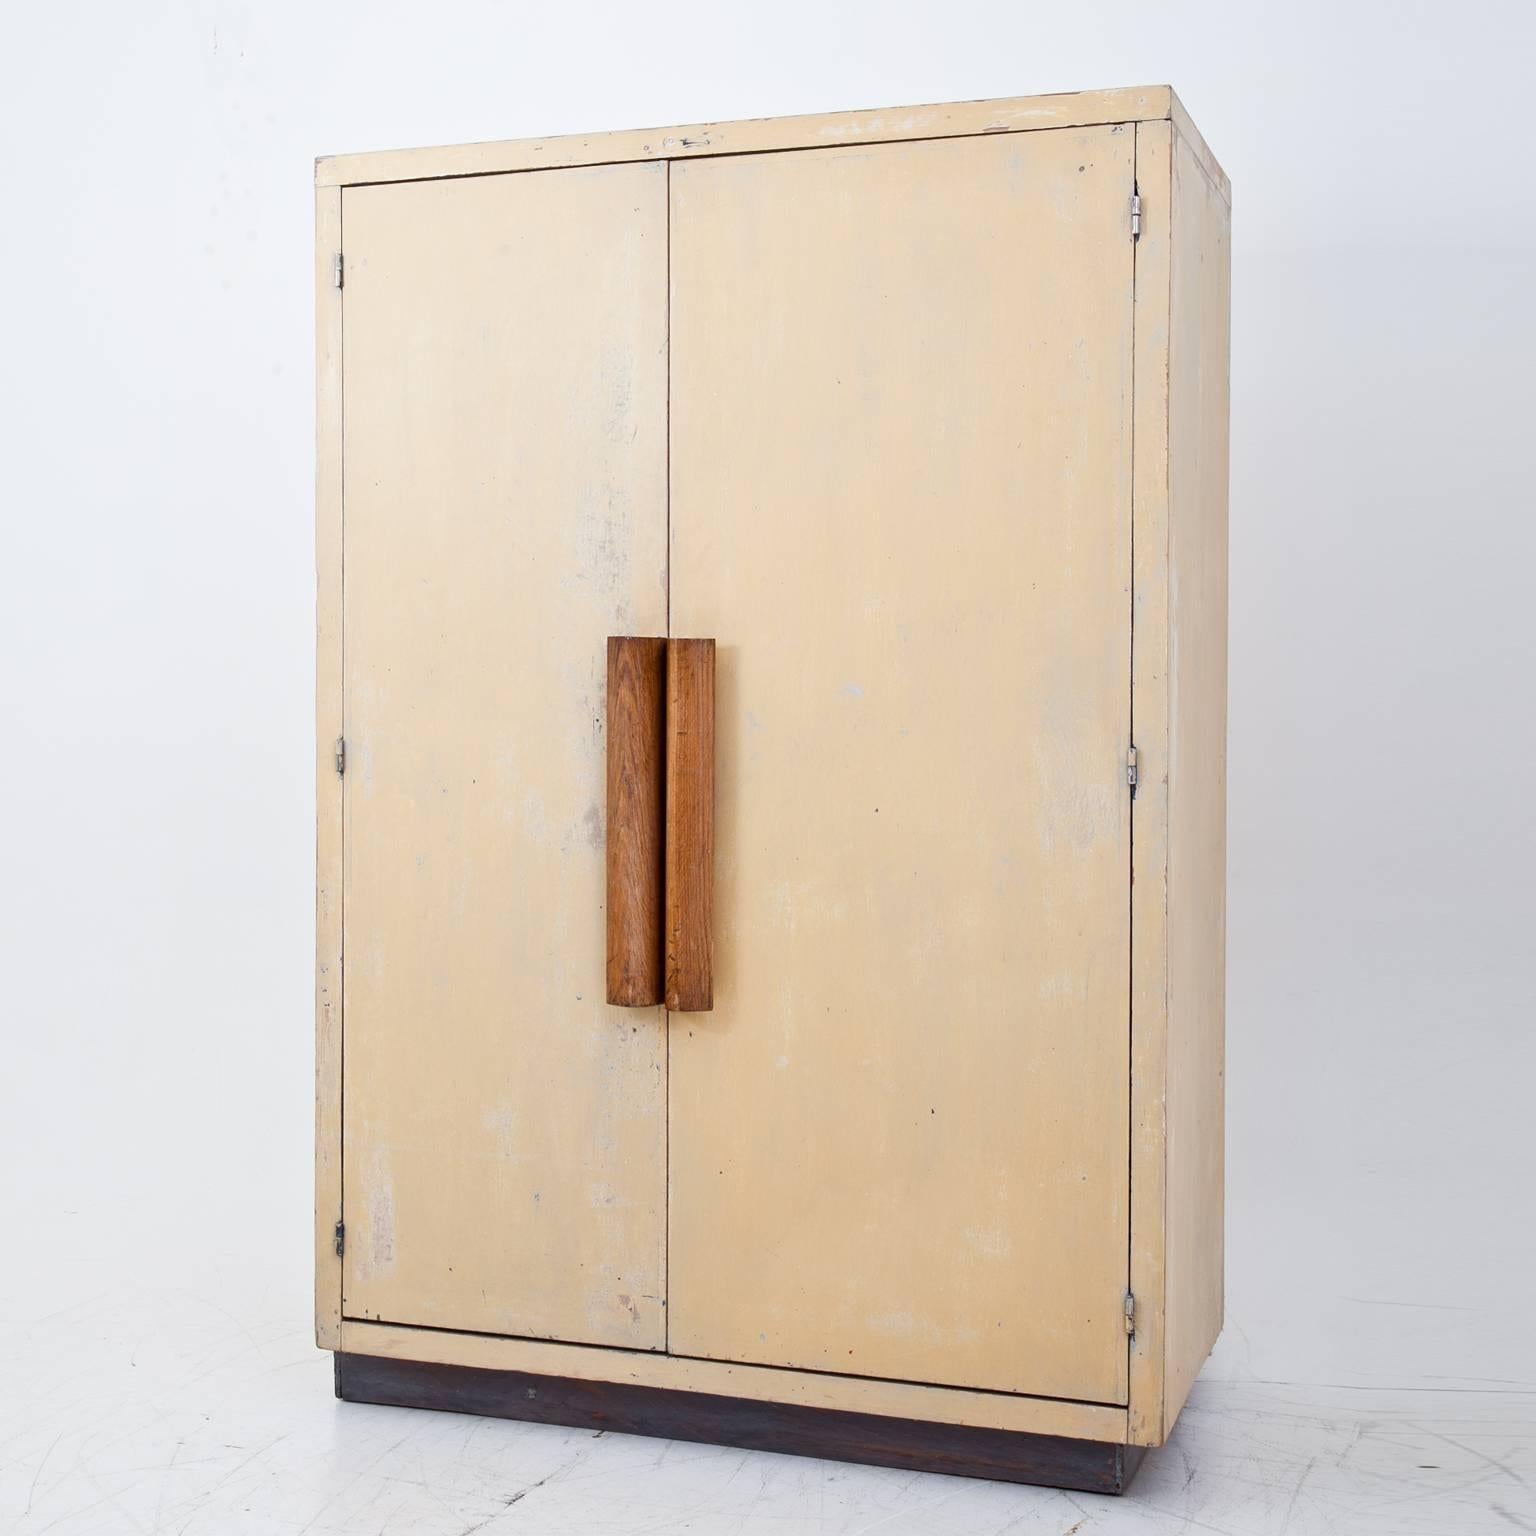 This armoire was especially designed for the apartments of Unité d’habitation in Marseille-Michelet and stood in front of the washing station in the children’s rooms. The streamlined shape of the body with the large wooden handles and the